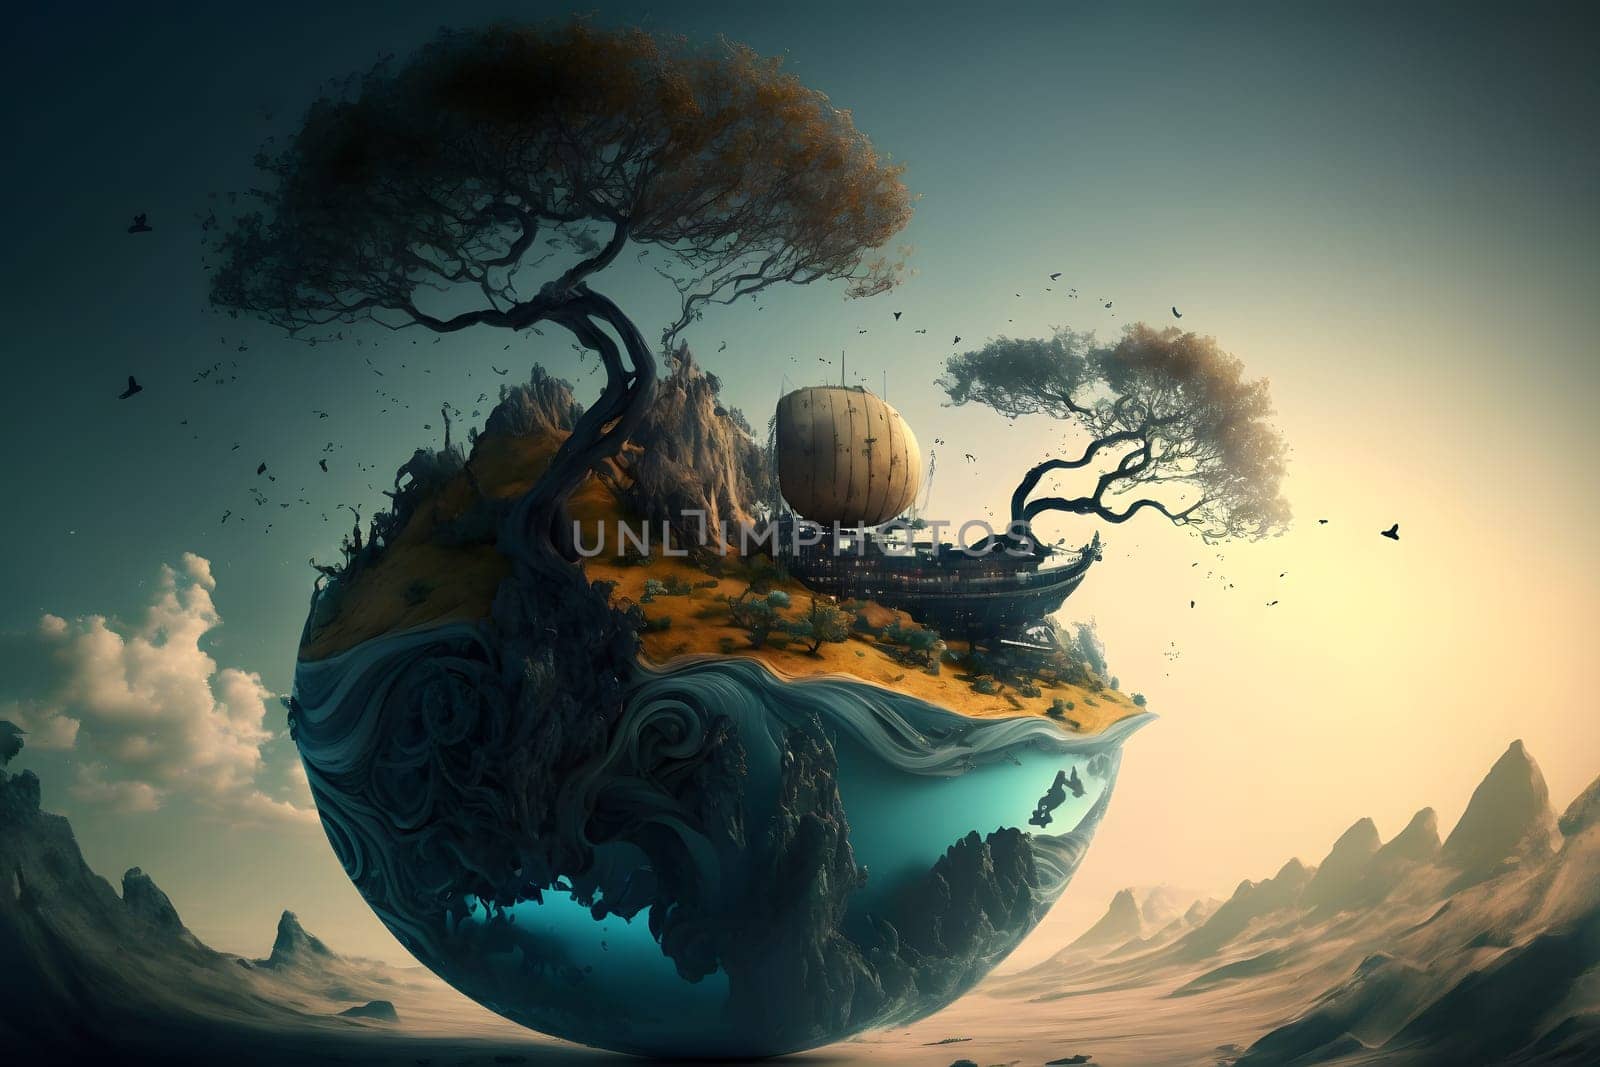 surreal morning dreamscape of floating bubble with tree and boat on it, neural network generated art. Digitally generated image. Not based on any actual person, scene or pattern.